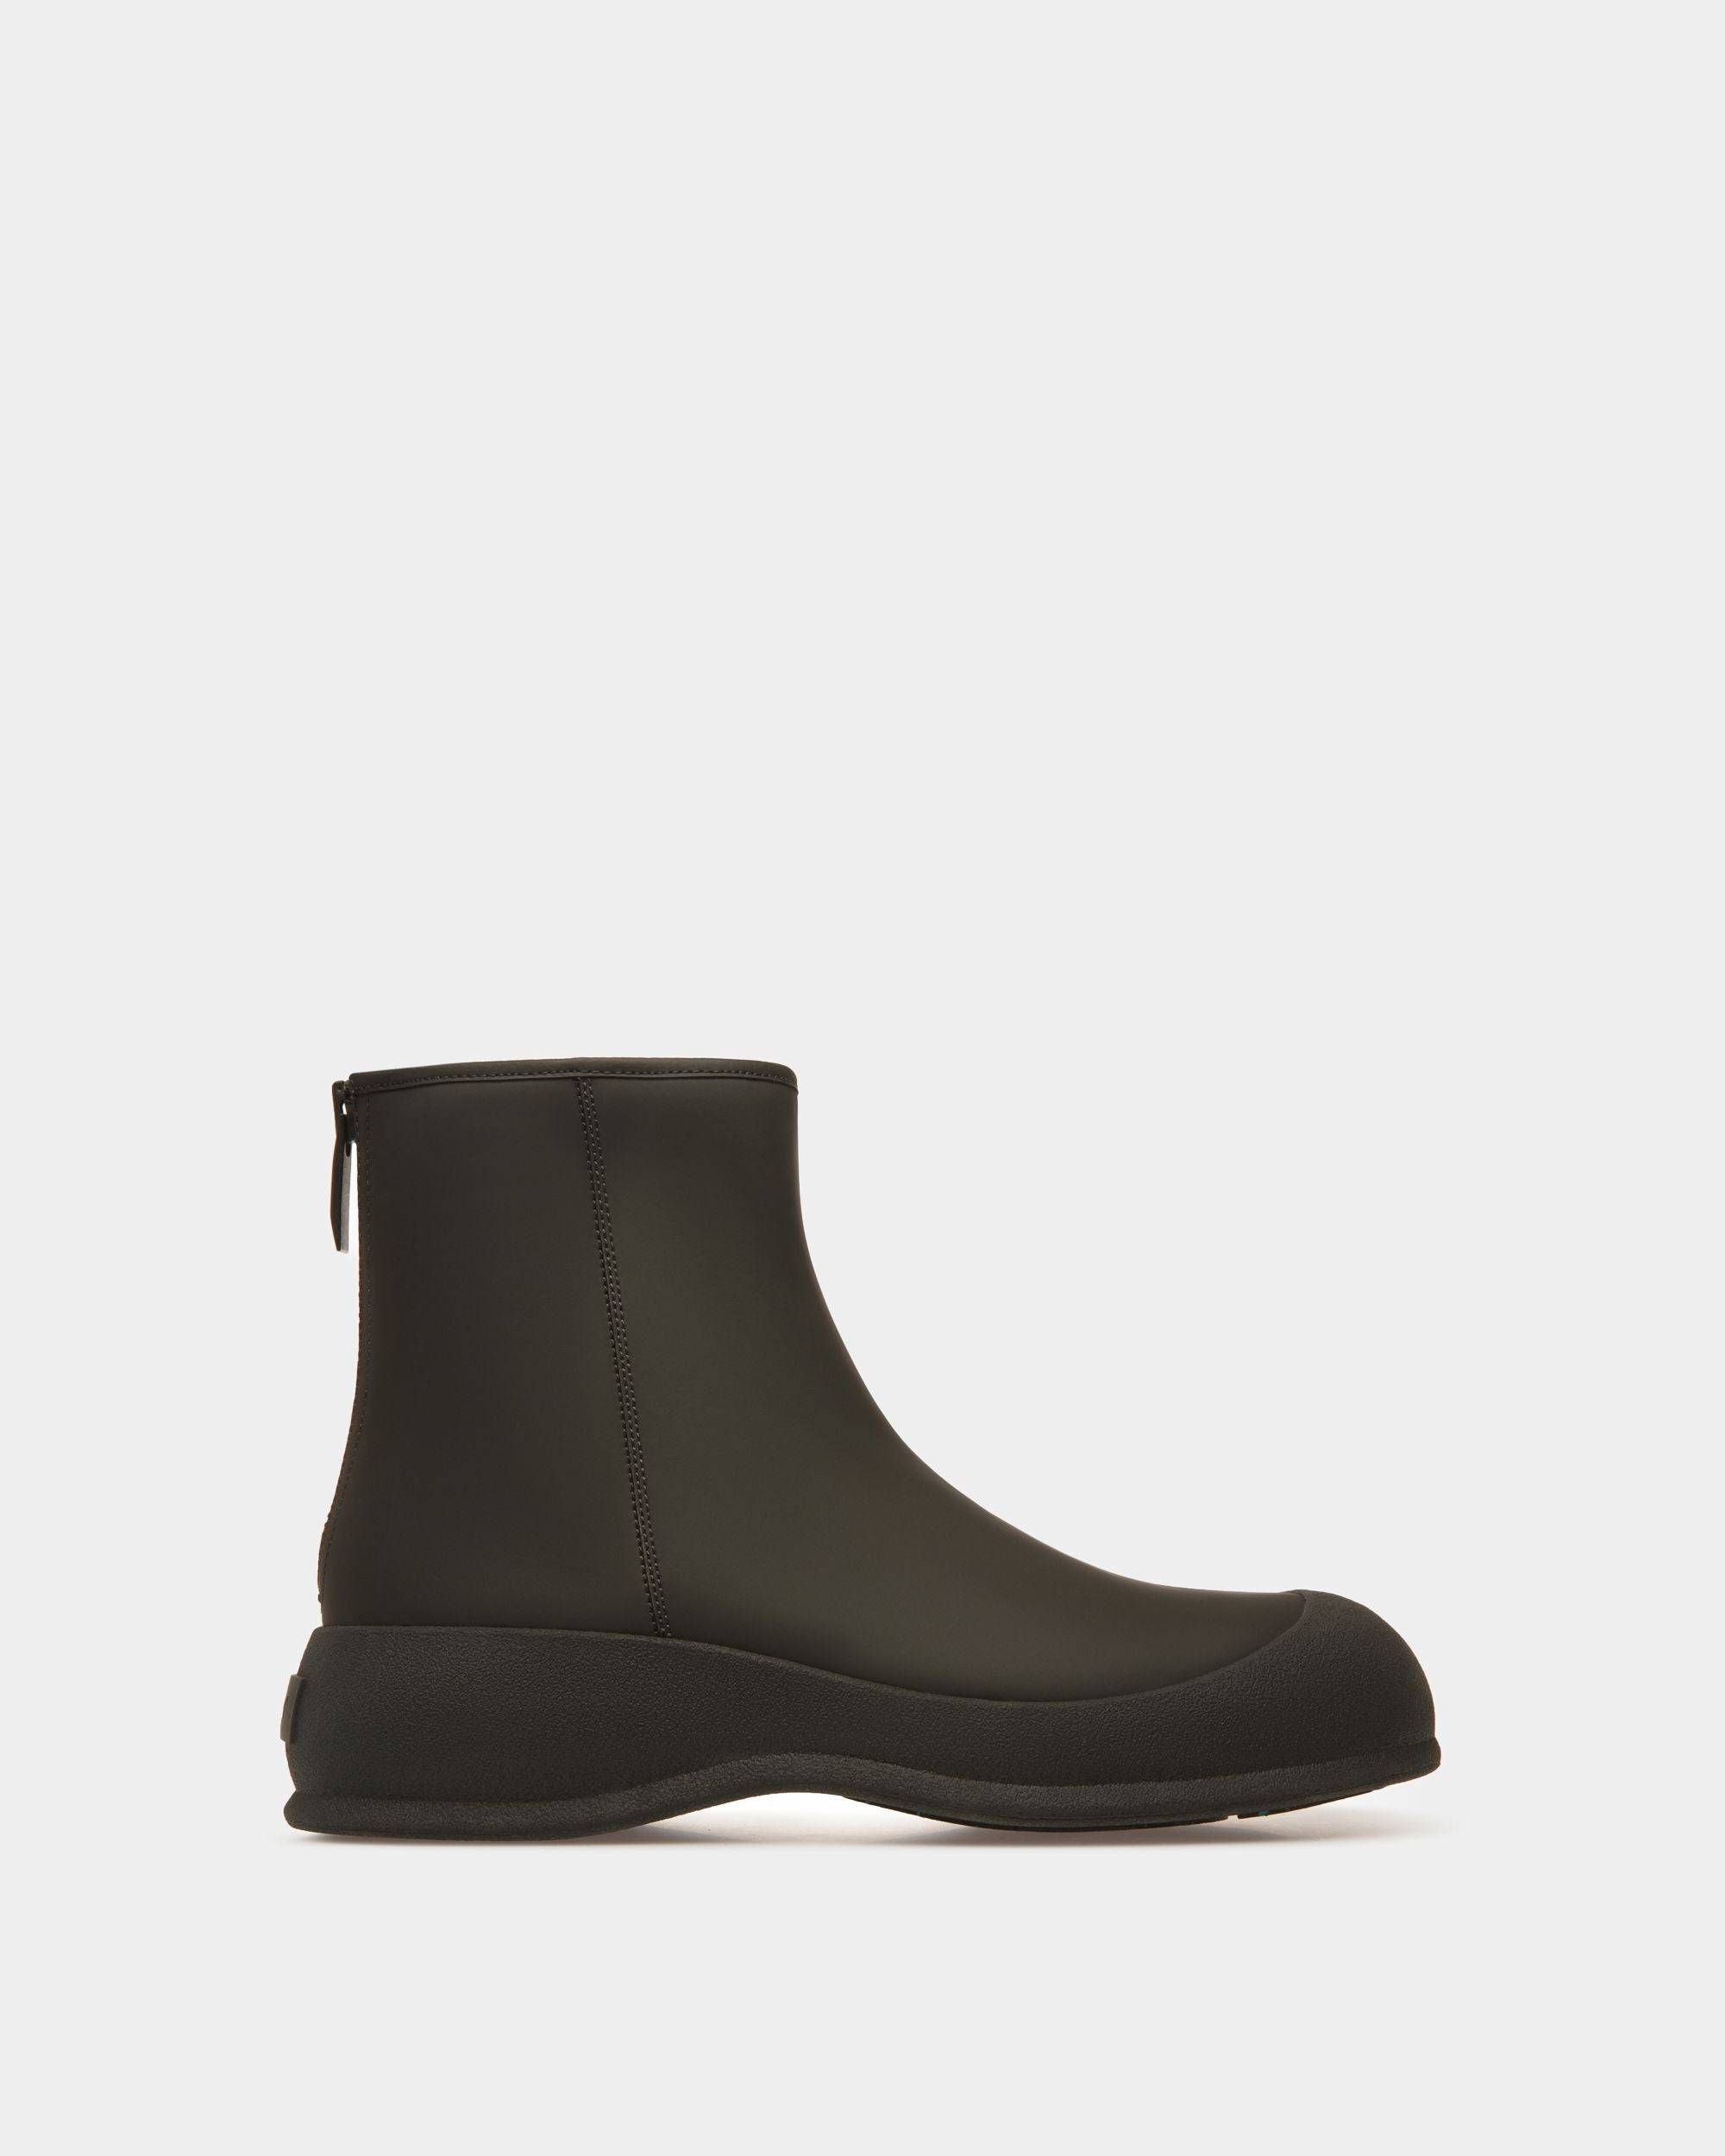 Men's Frei Snow Boots In Black Leather | Bally | Still Life Side